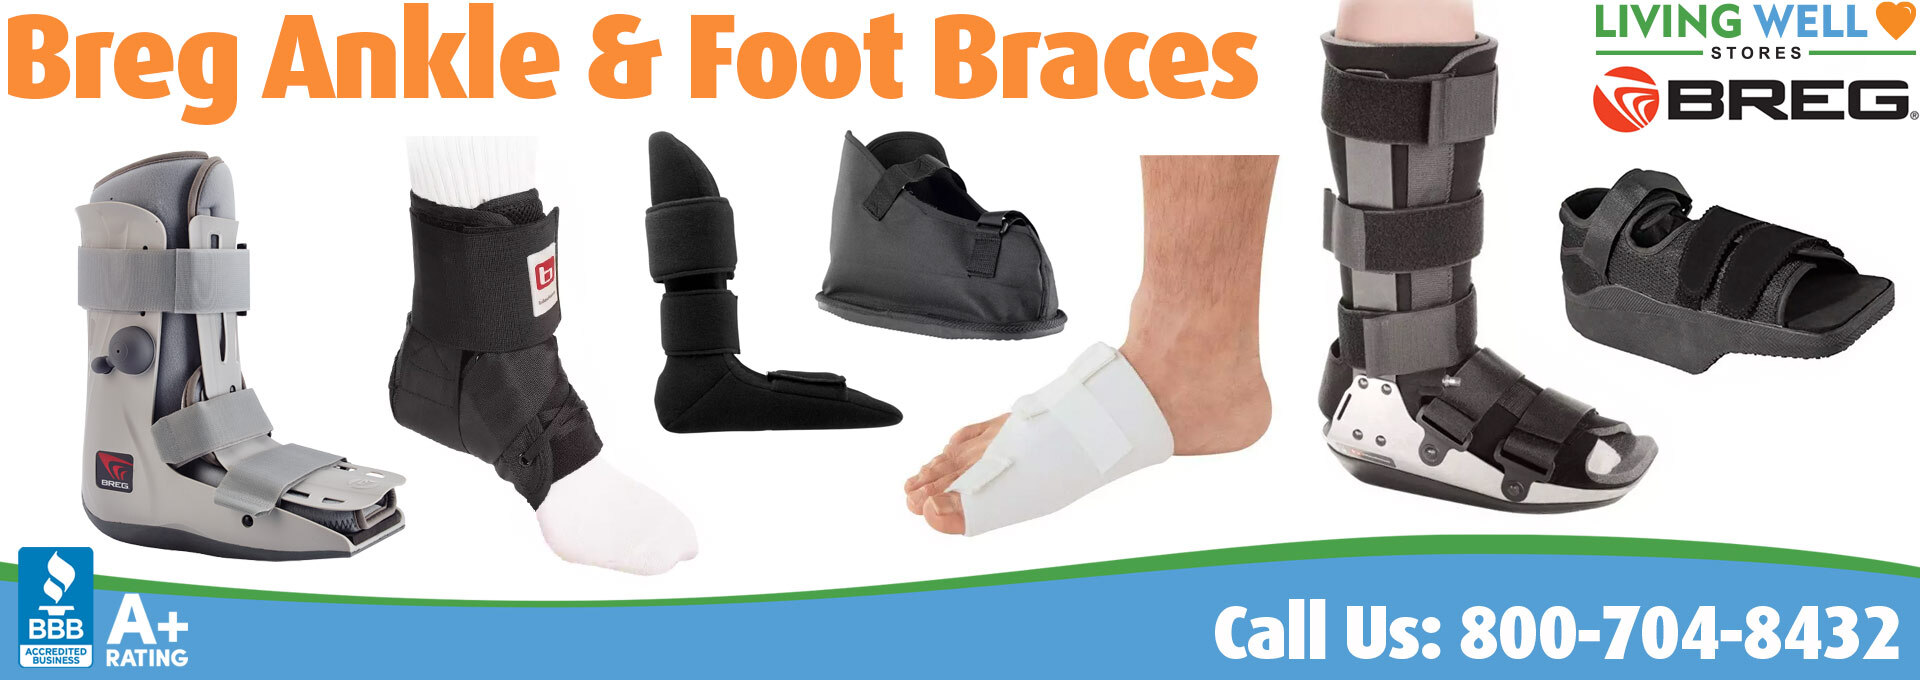 Living Well Stores: Featuring the very best selection of Breg Ankle and Foot Brace Products for Sale